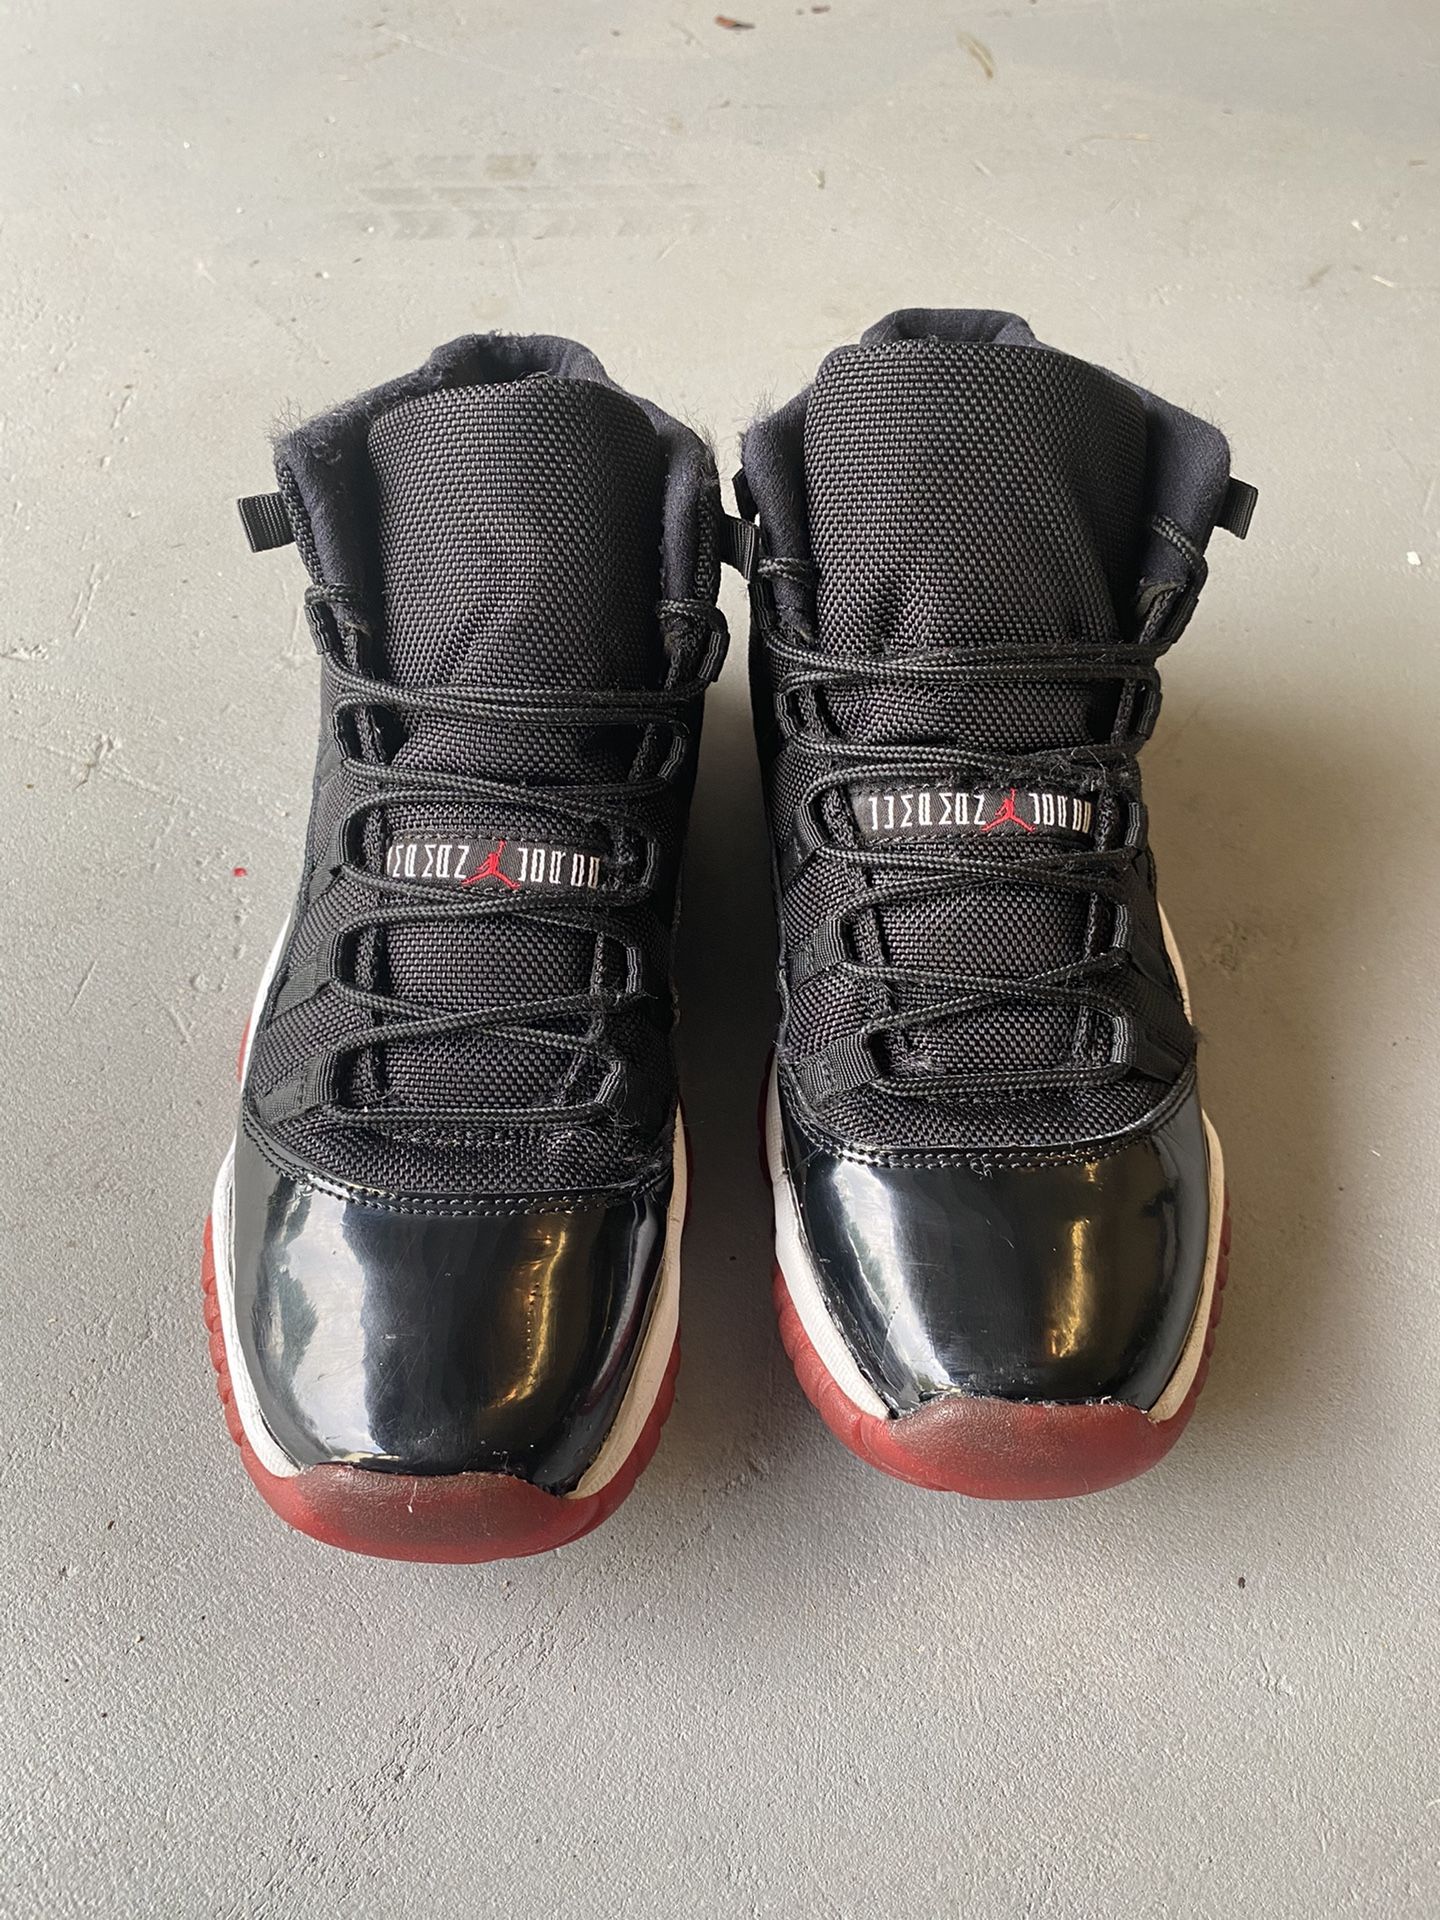 Bred 11 size 7